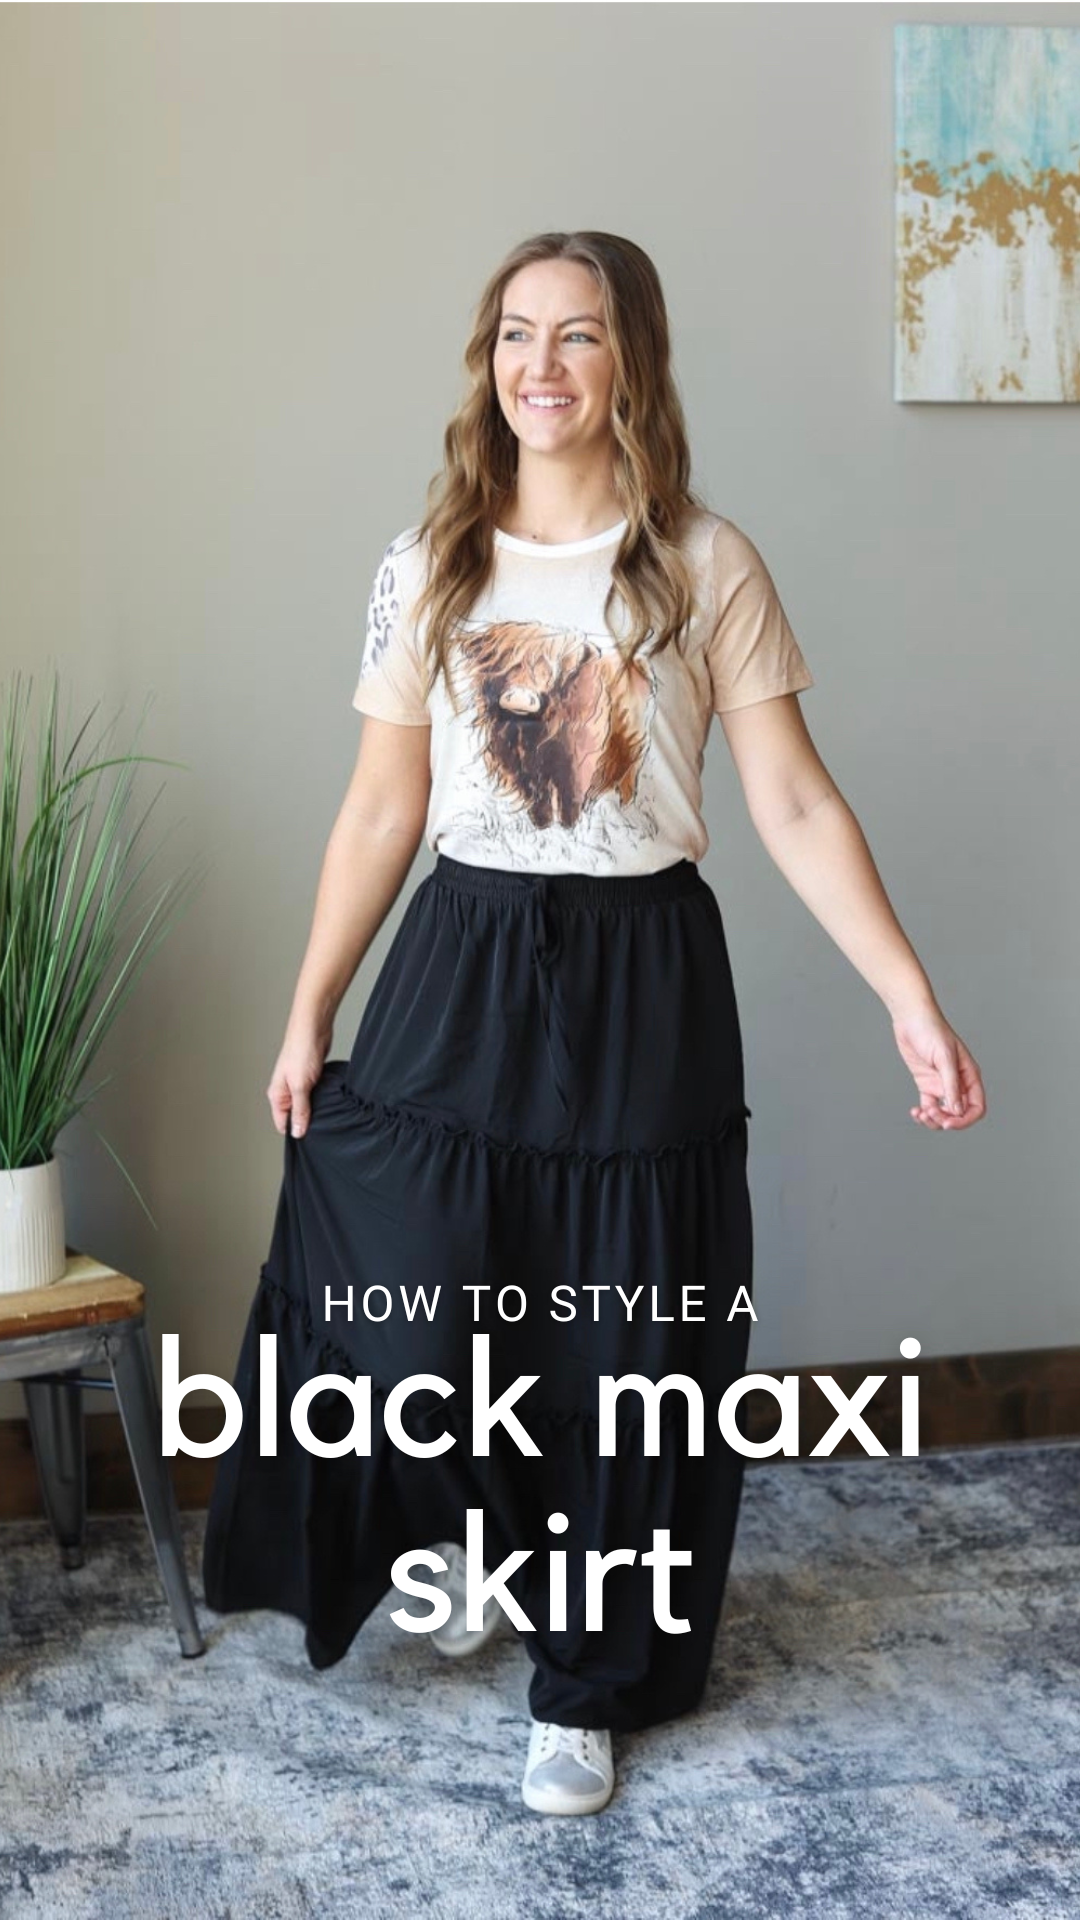 3 Ways to Style a Black Maxi Skirt for Casual Summer Outfits